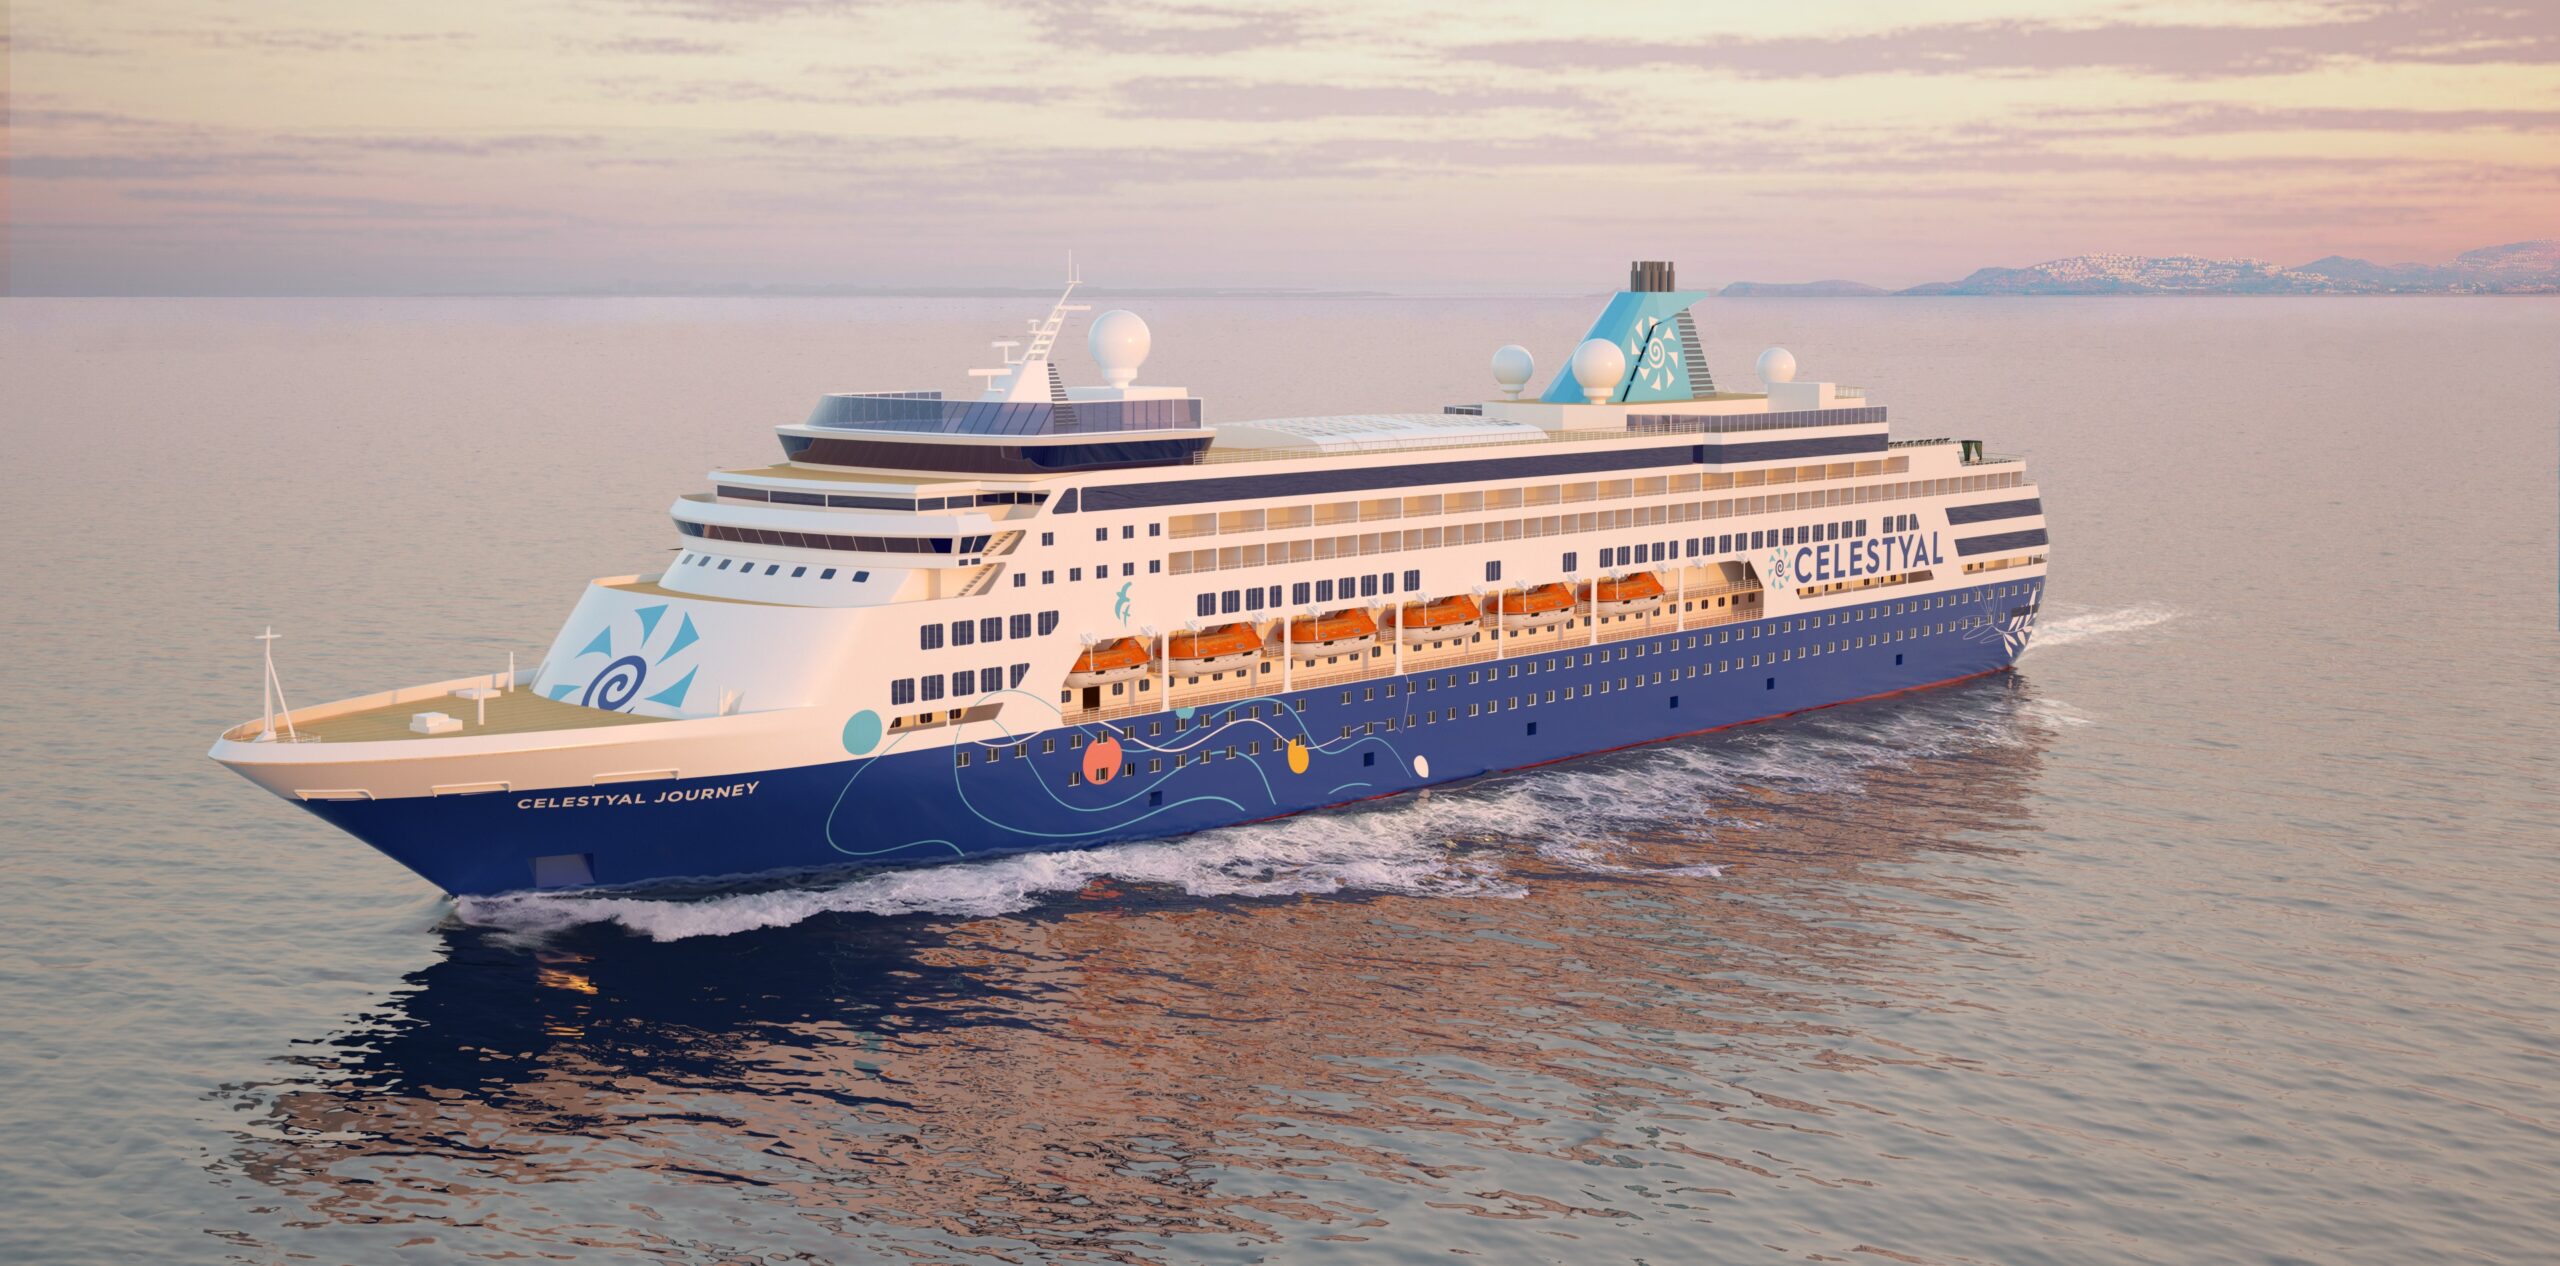 Aviate team up with Celestyal Cruises